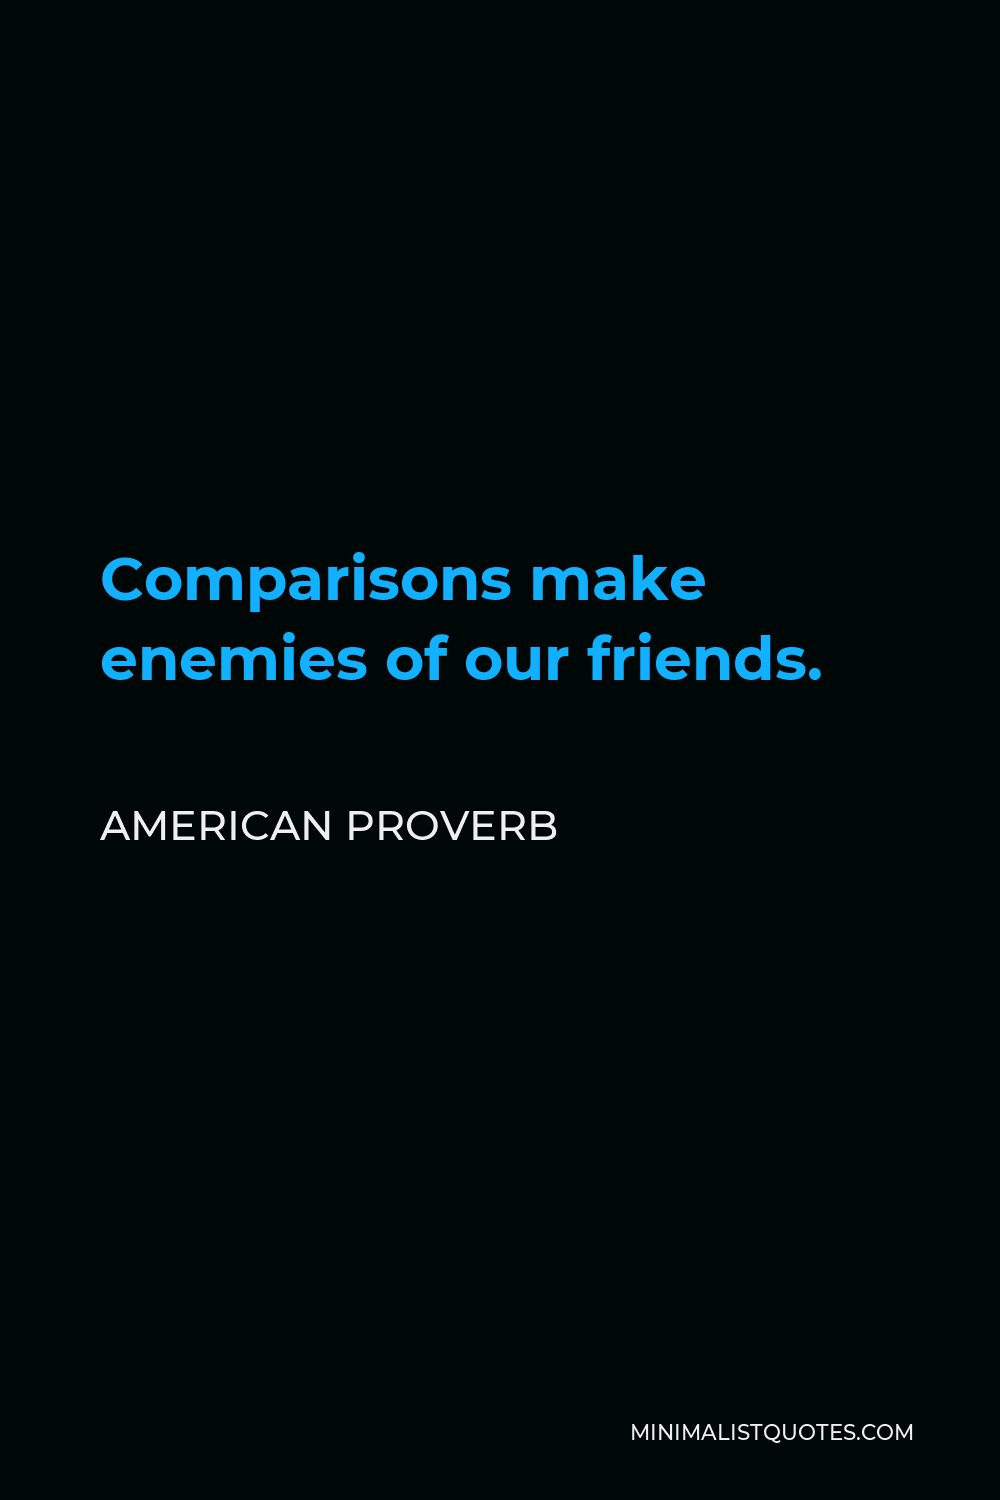 American Proverb Quote - Comparisons make enemies of our friends.